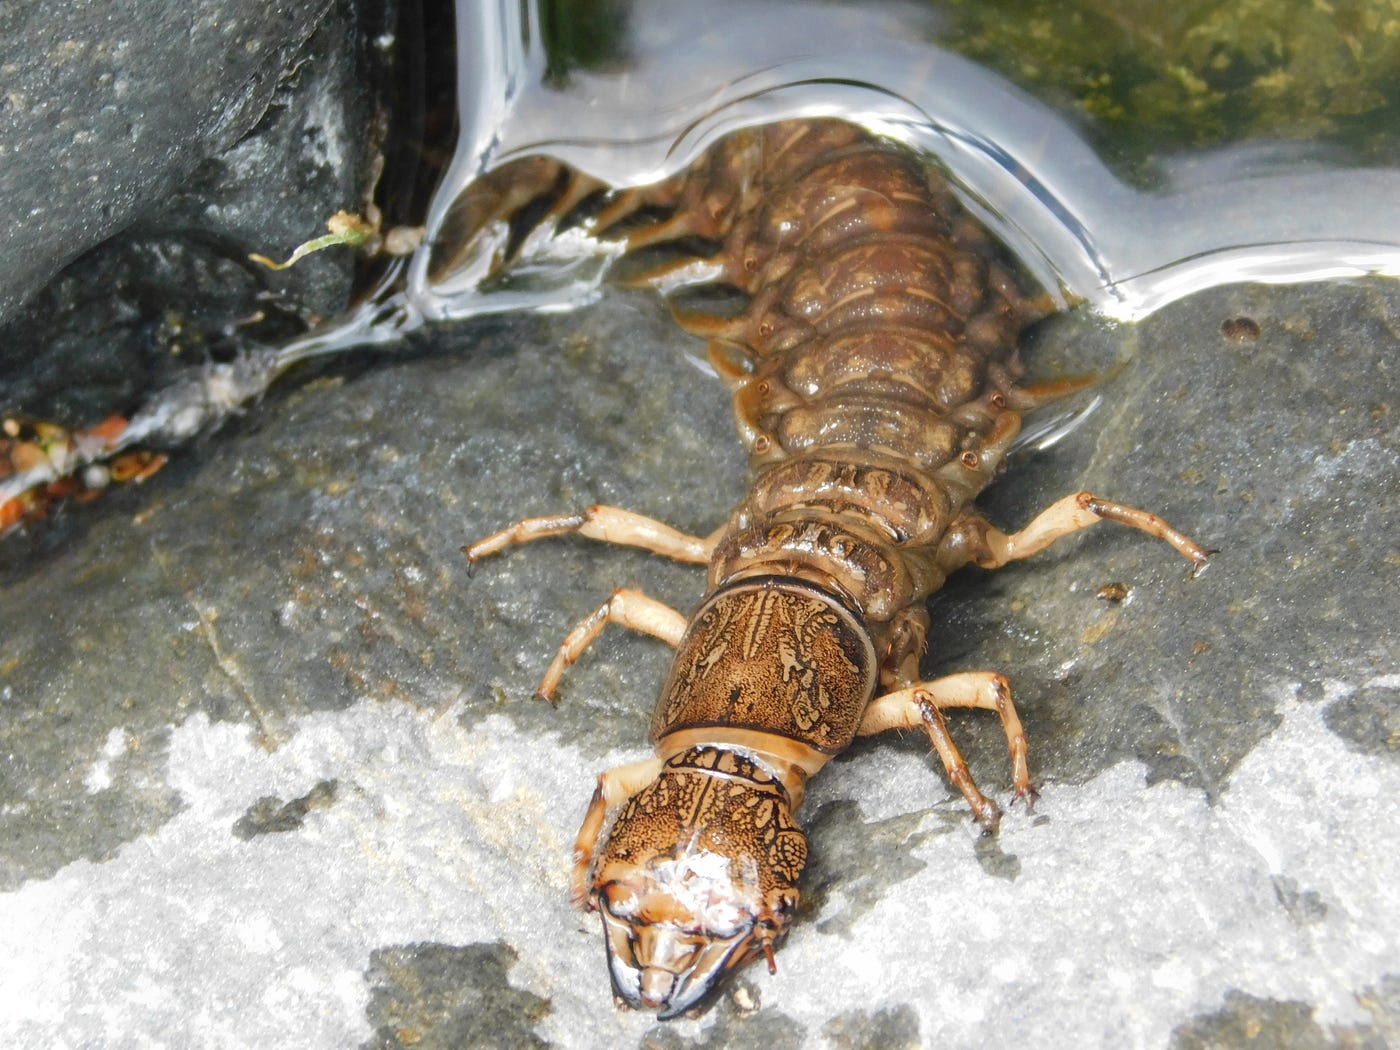 Dobsonfly - A-Z Animals